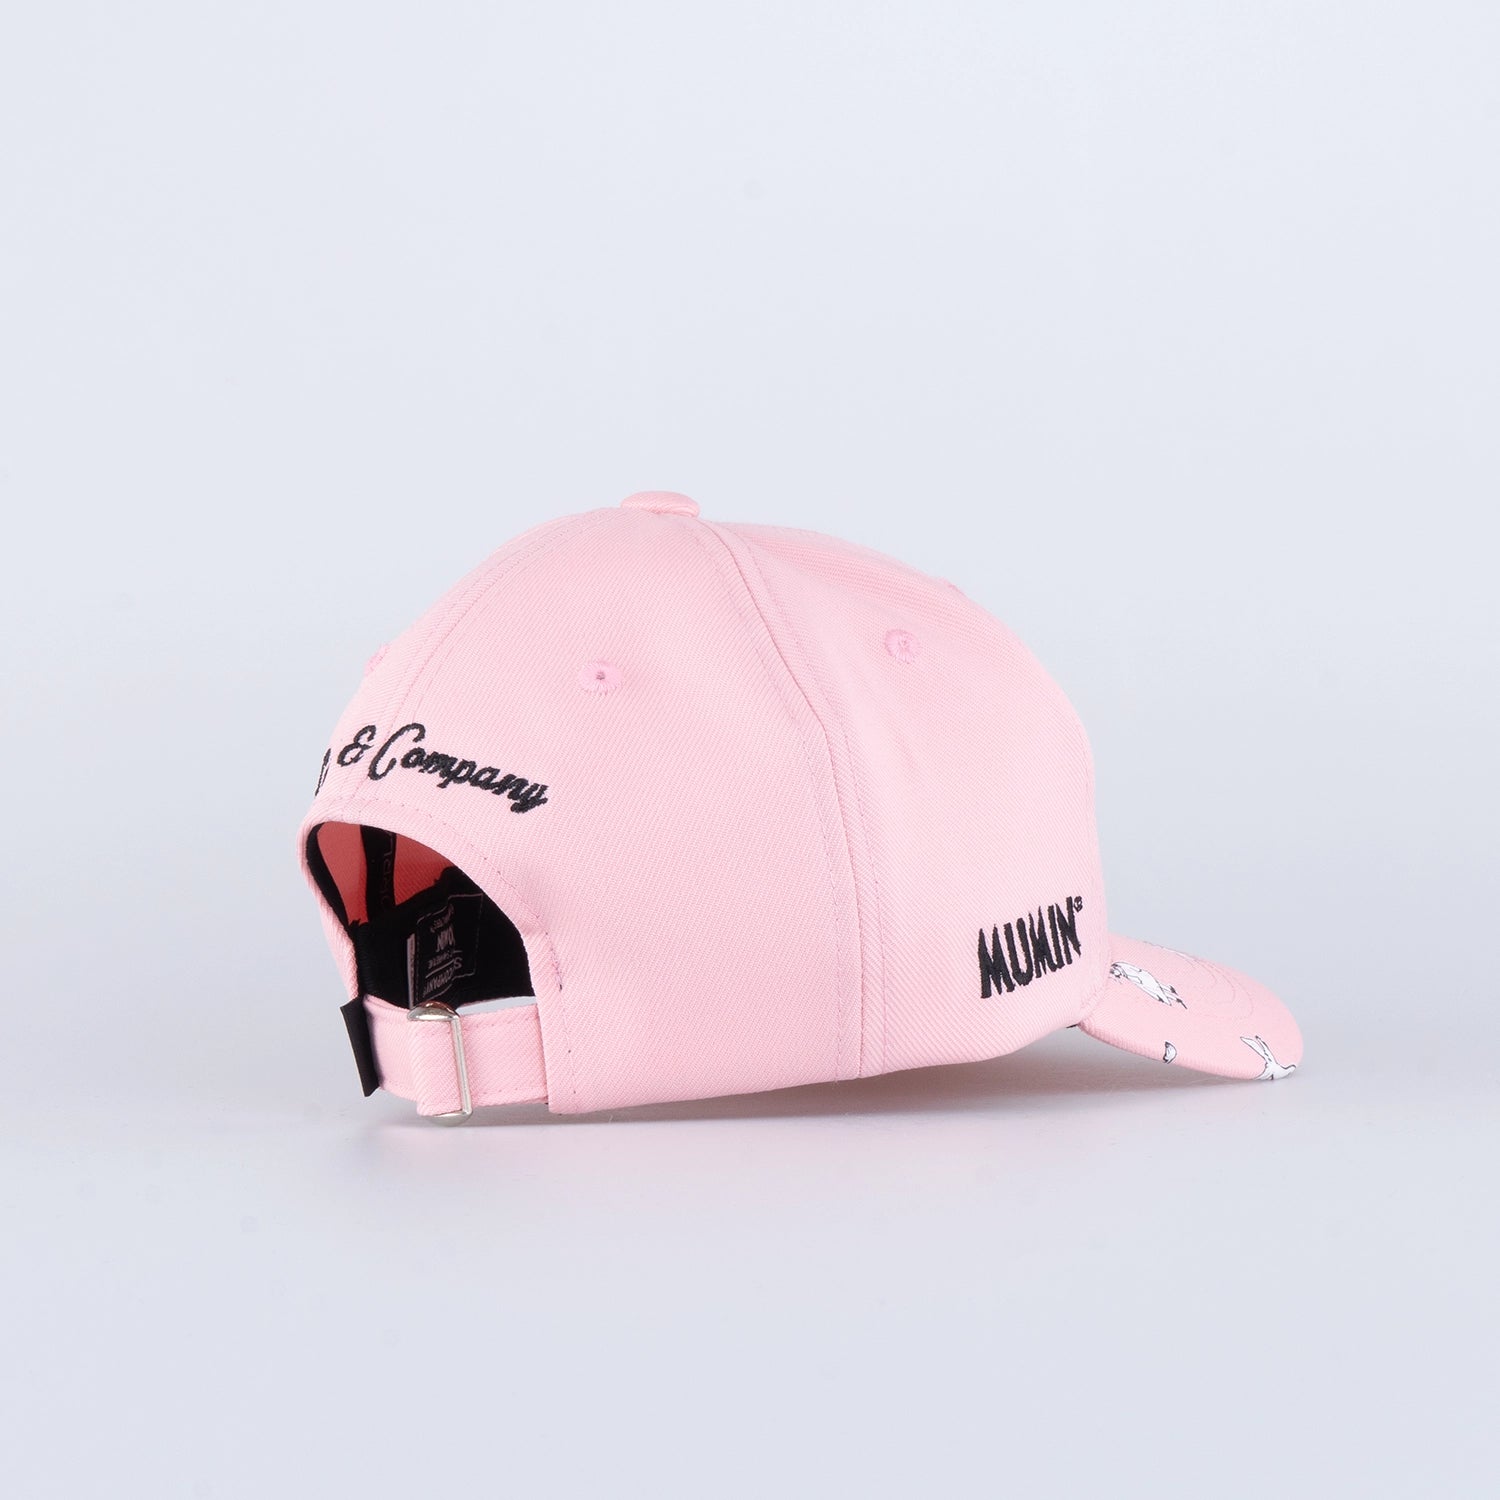 GREAT NORRLAND KIDS CAP - HOOKED MUMIN PINK